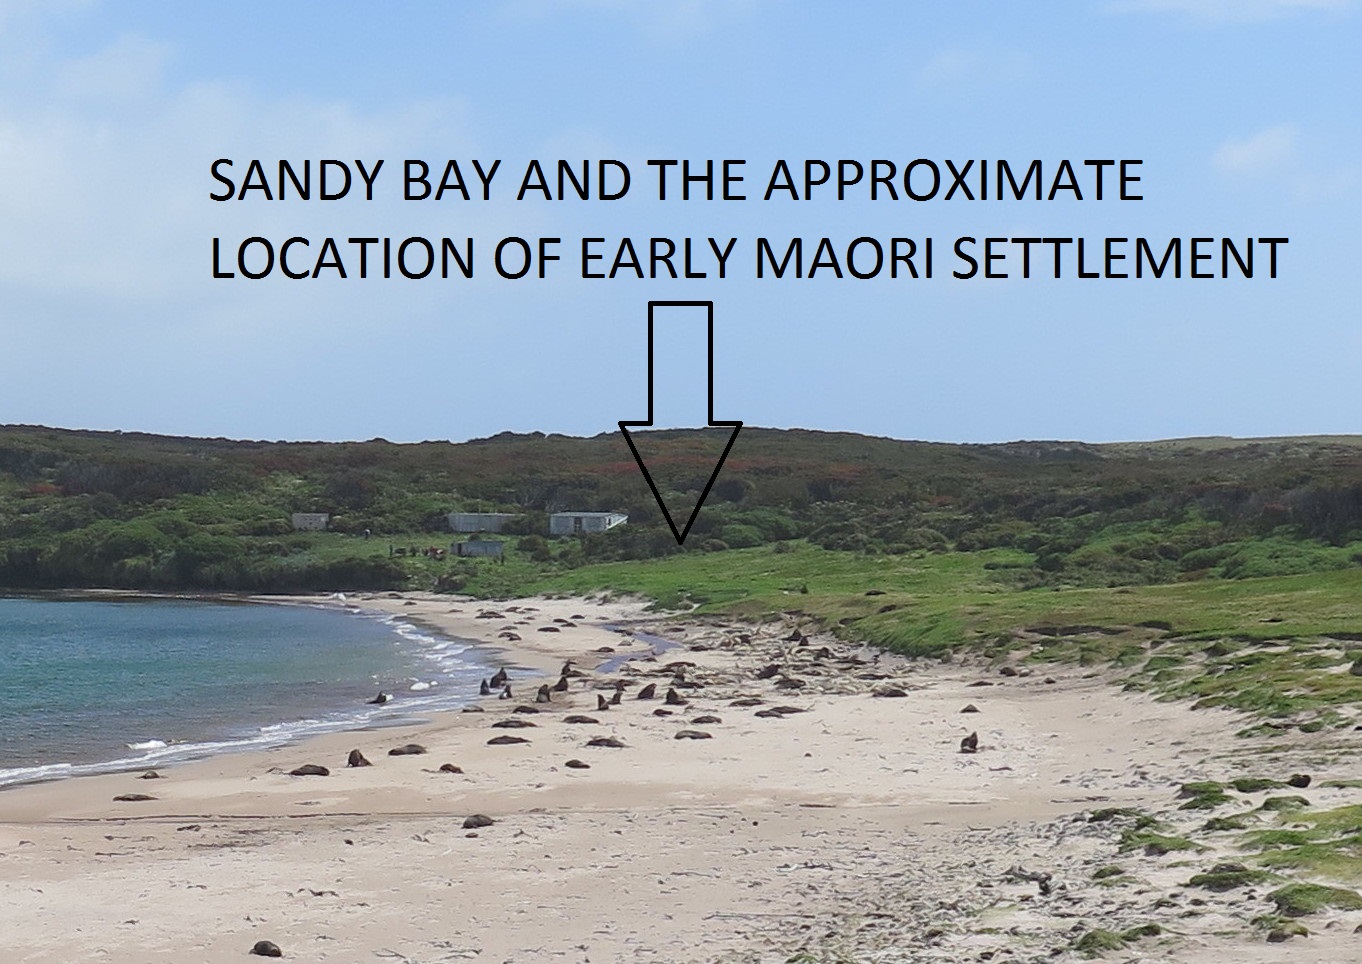 Sandy Bay site photographed on a voyage to The Auckland Islands and Campbell Island in January 2015
